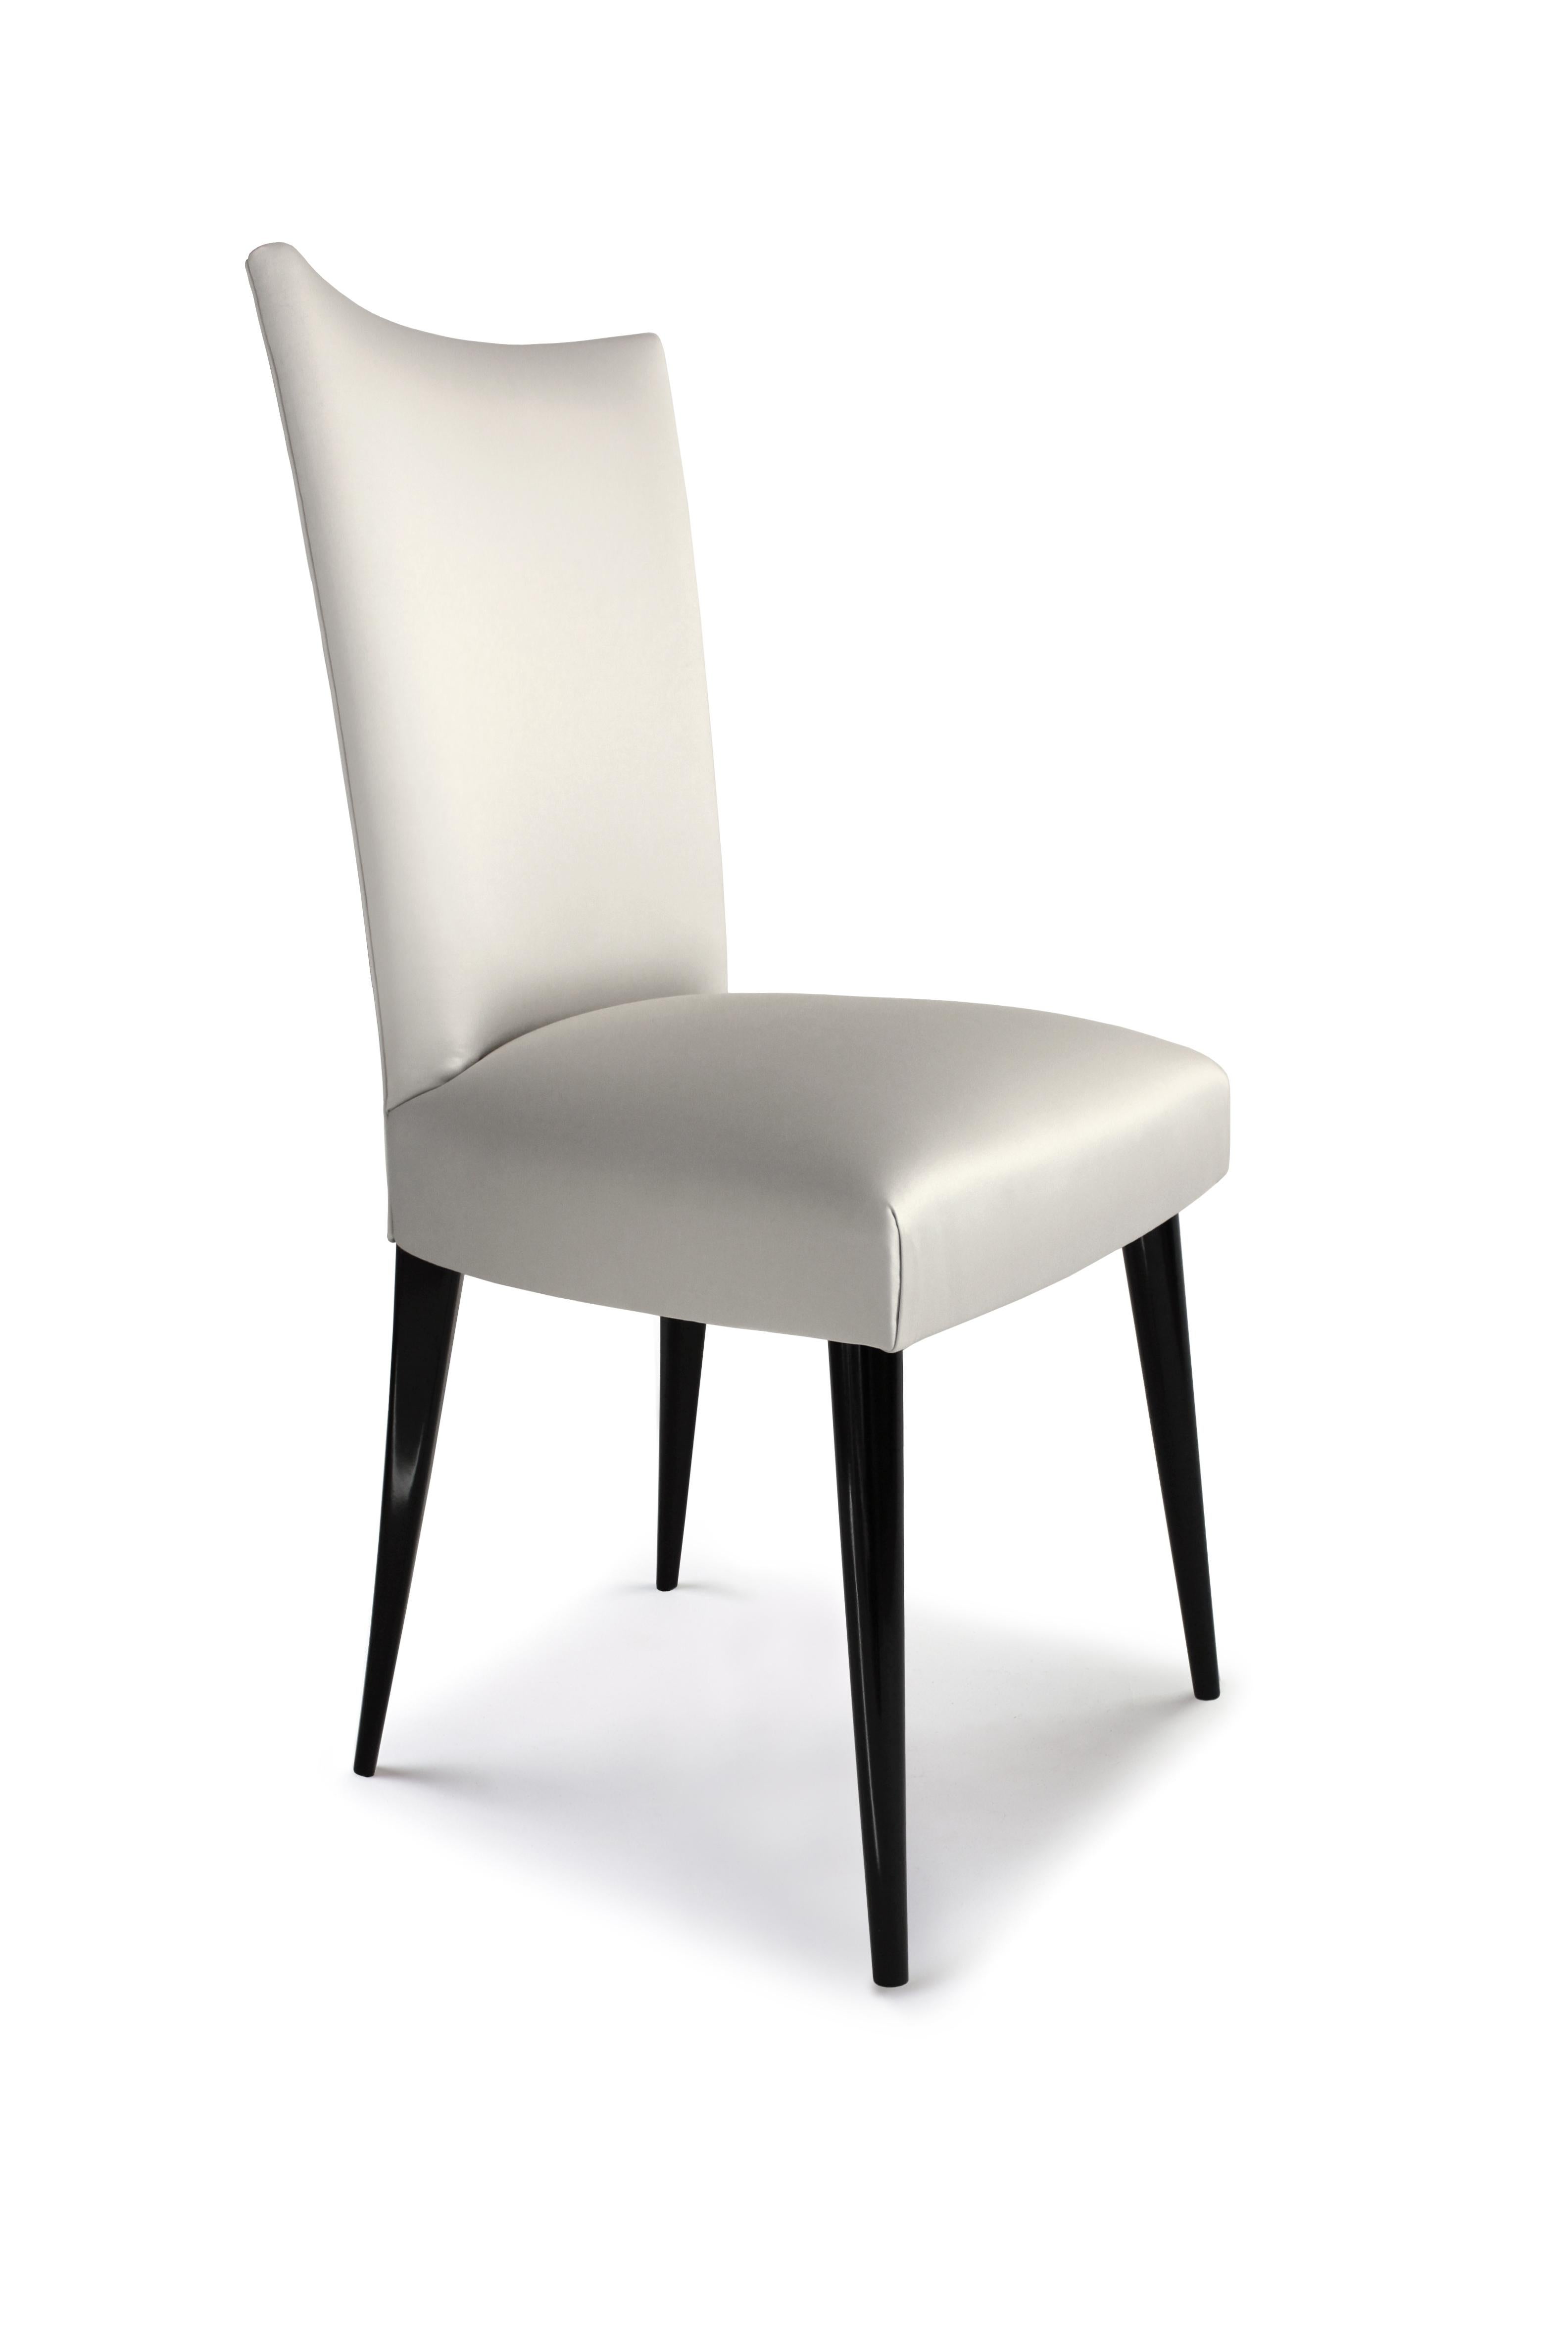 British Aiveen Daly Agave Stiletto Chair  For Sale